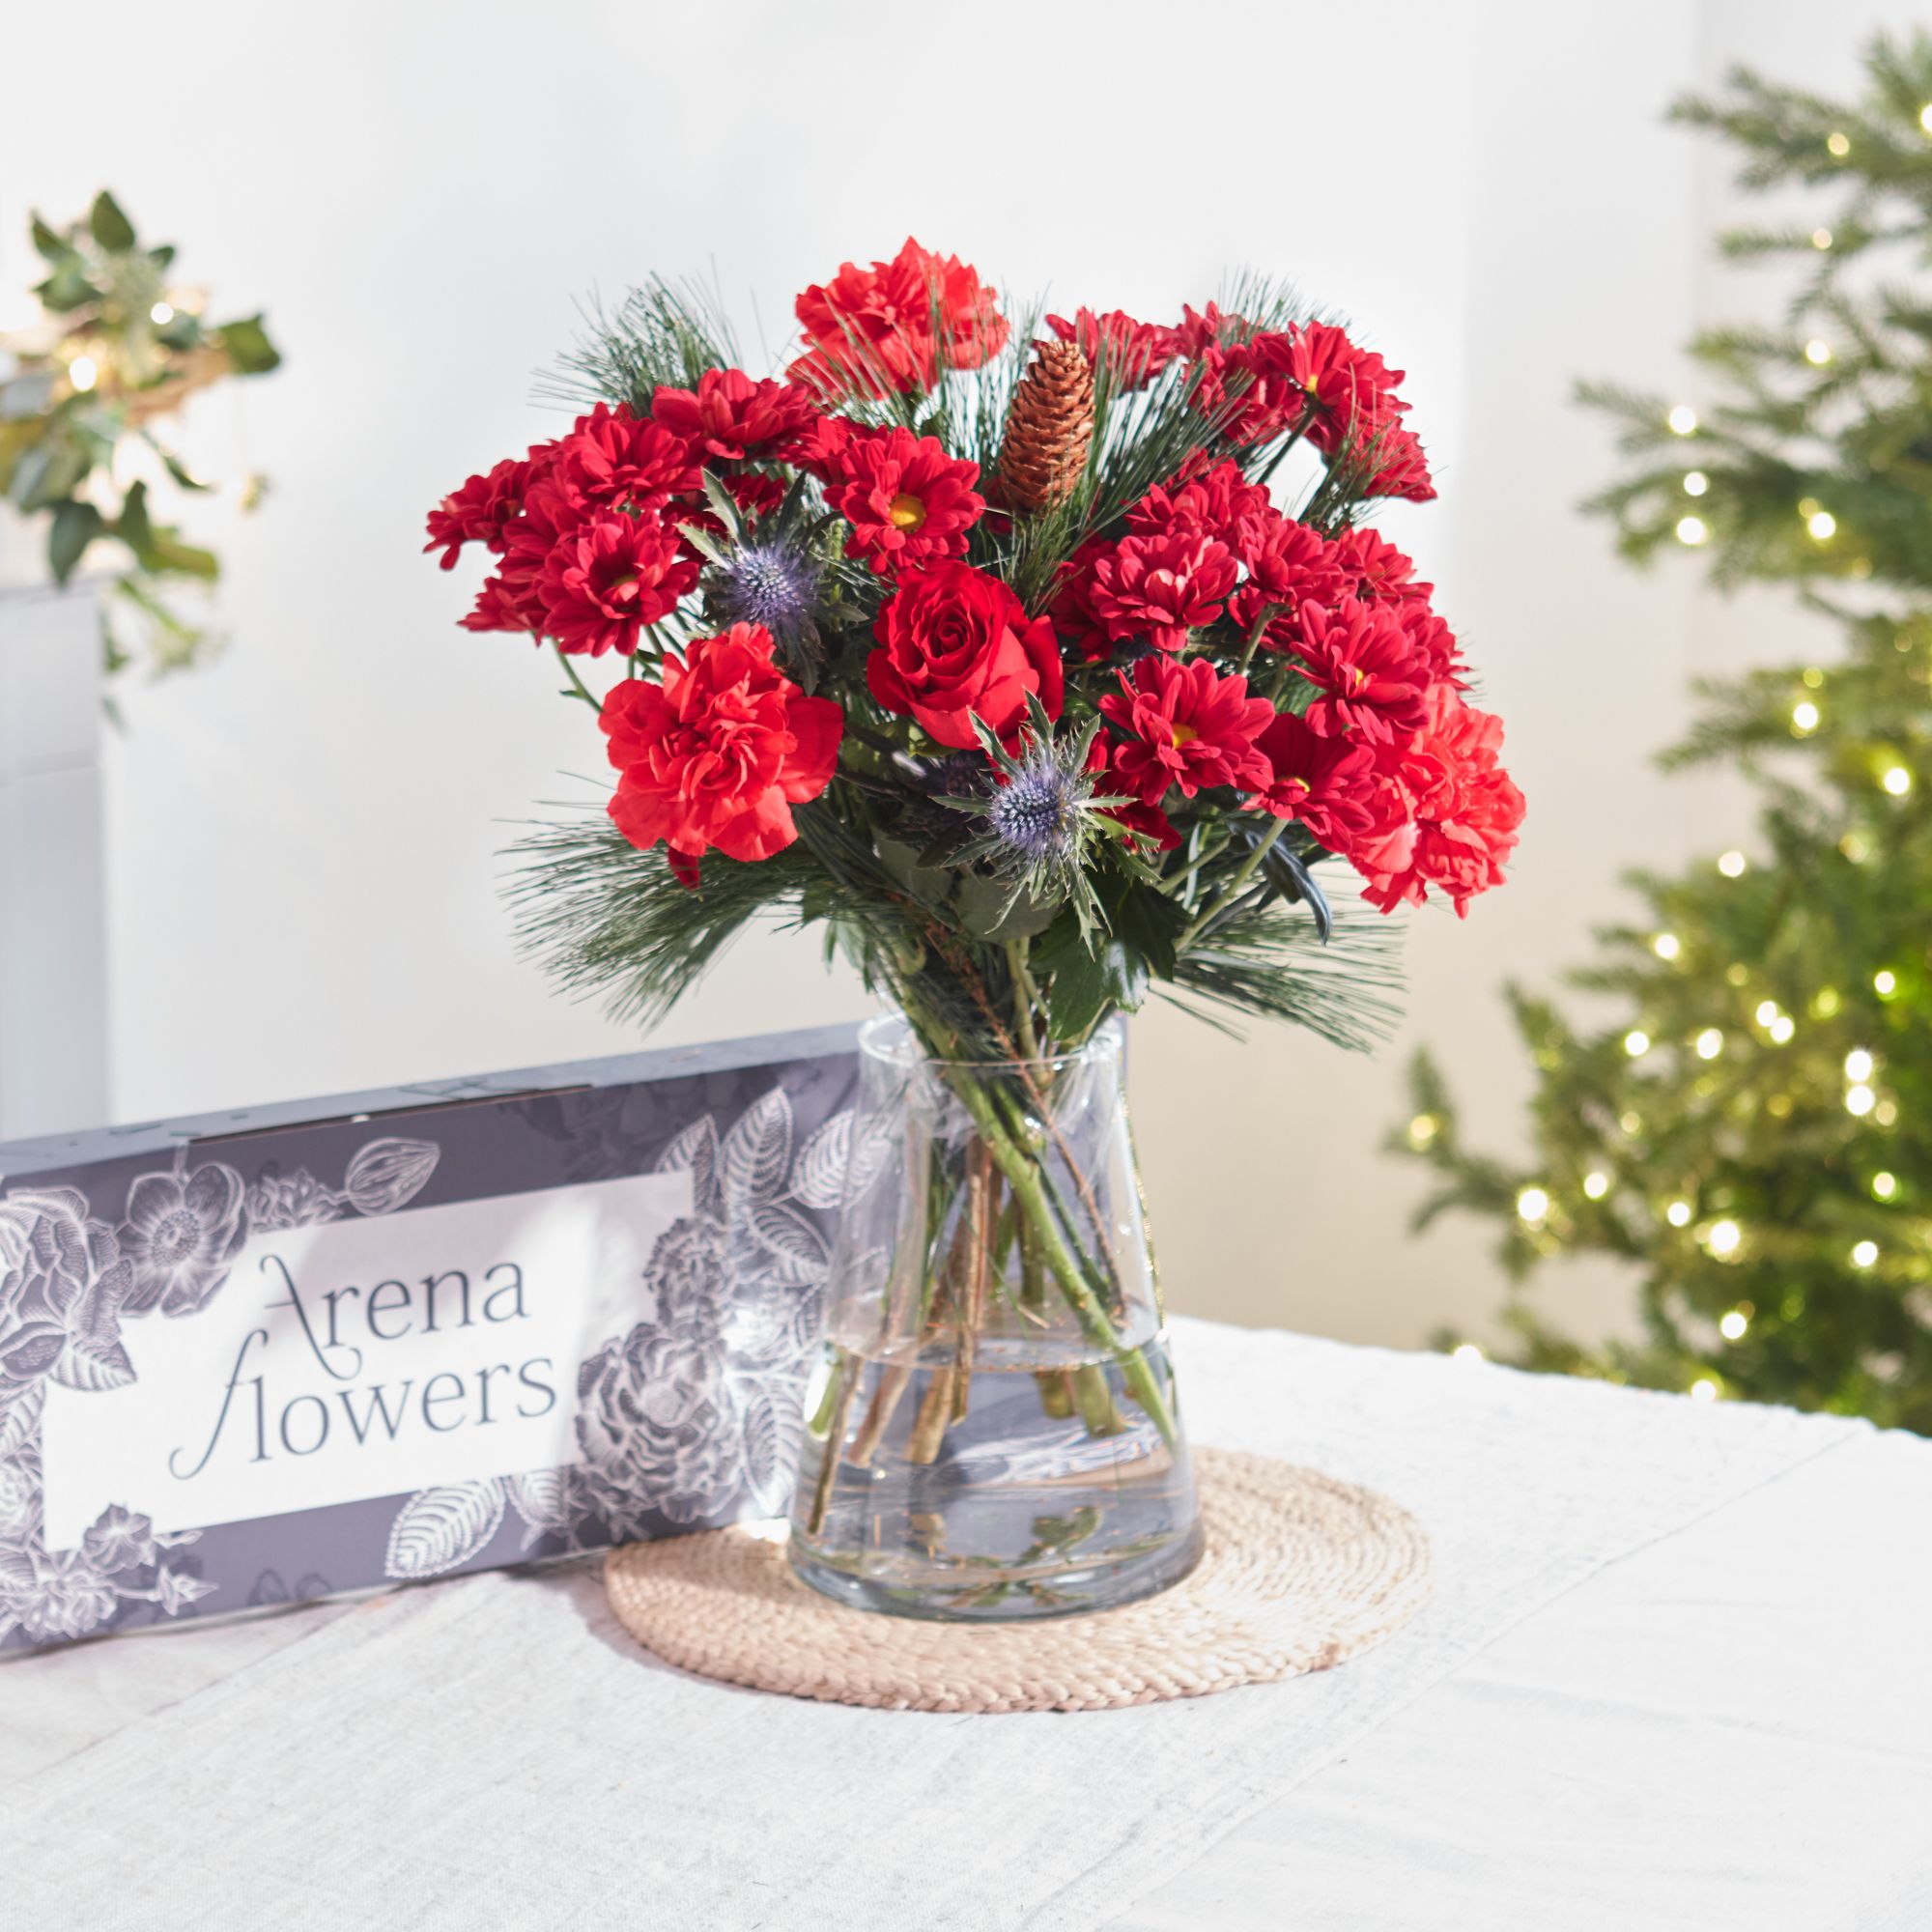 Send festive 'Jolly Red' letterbox Christmas flowers | Arena Flowers